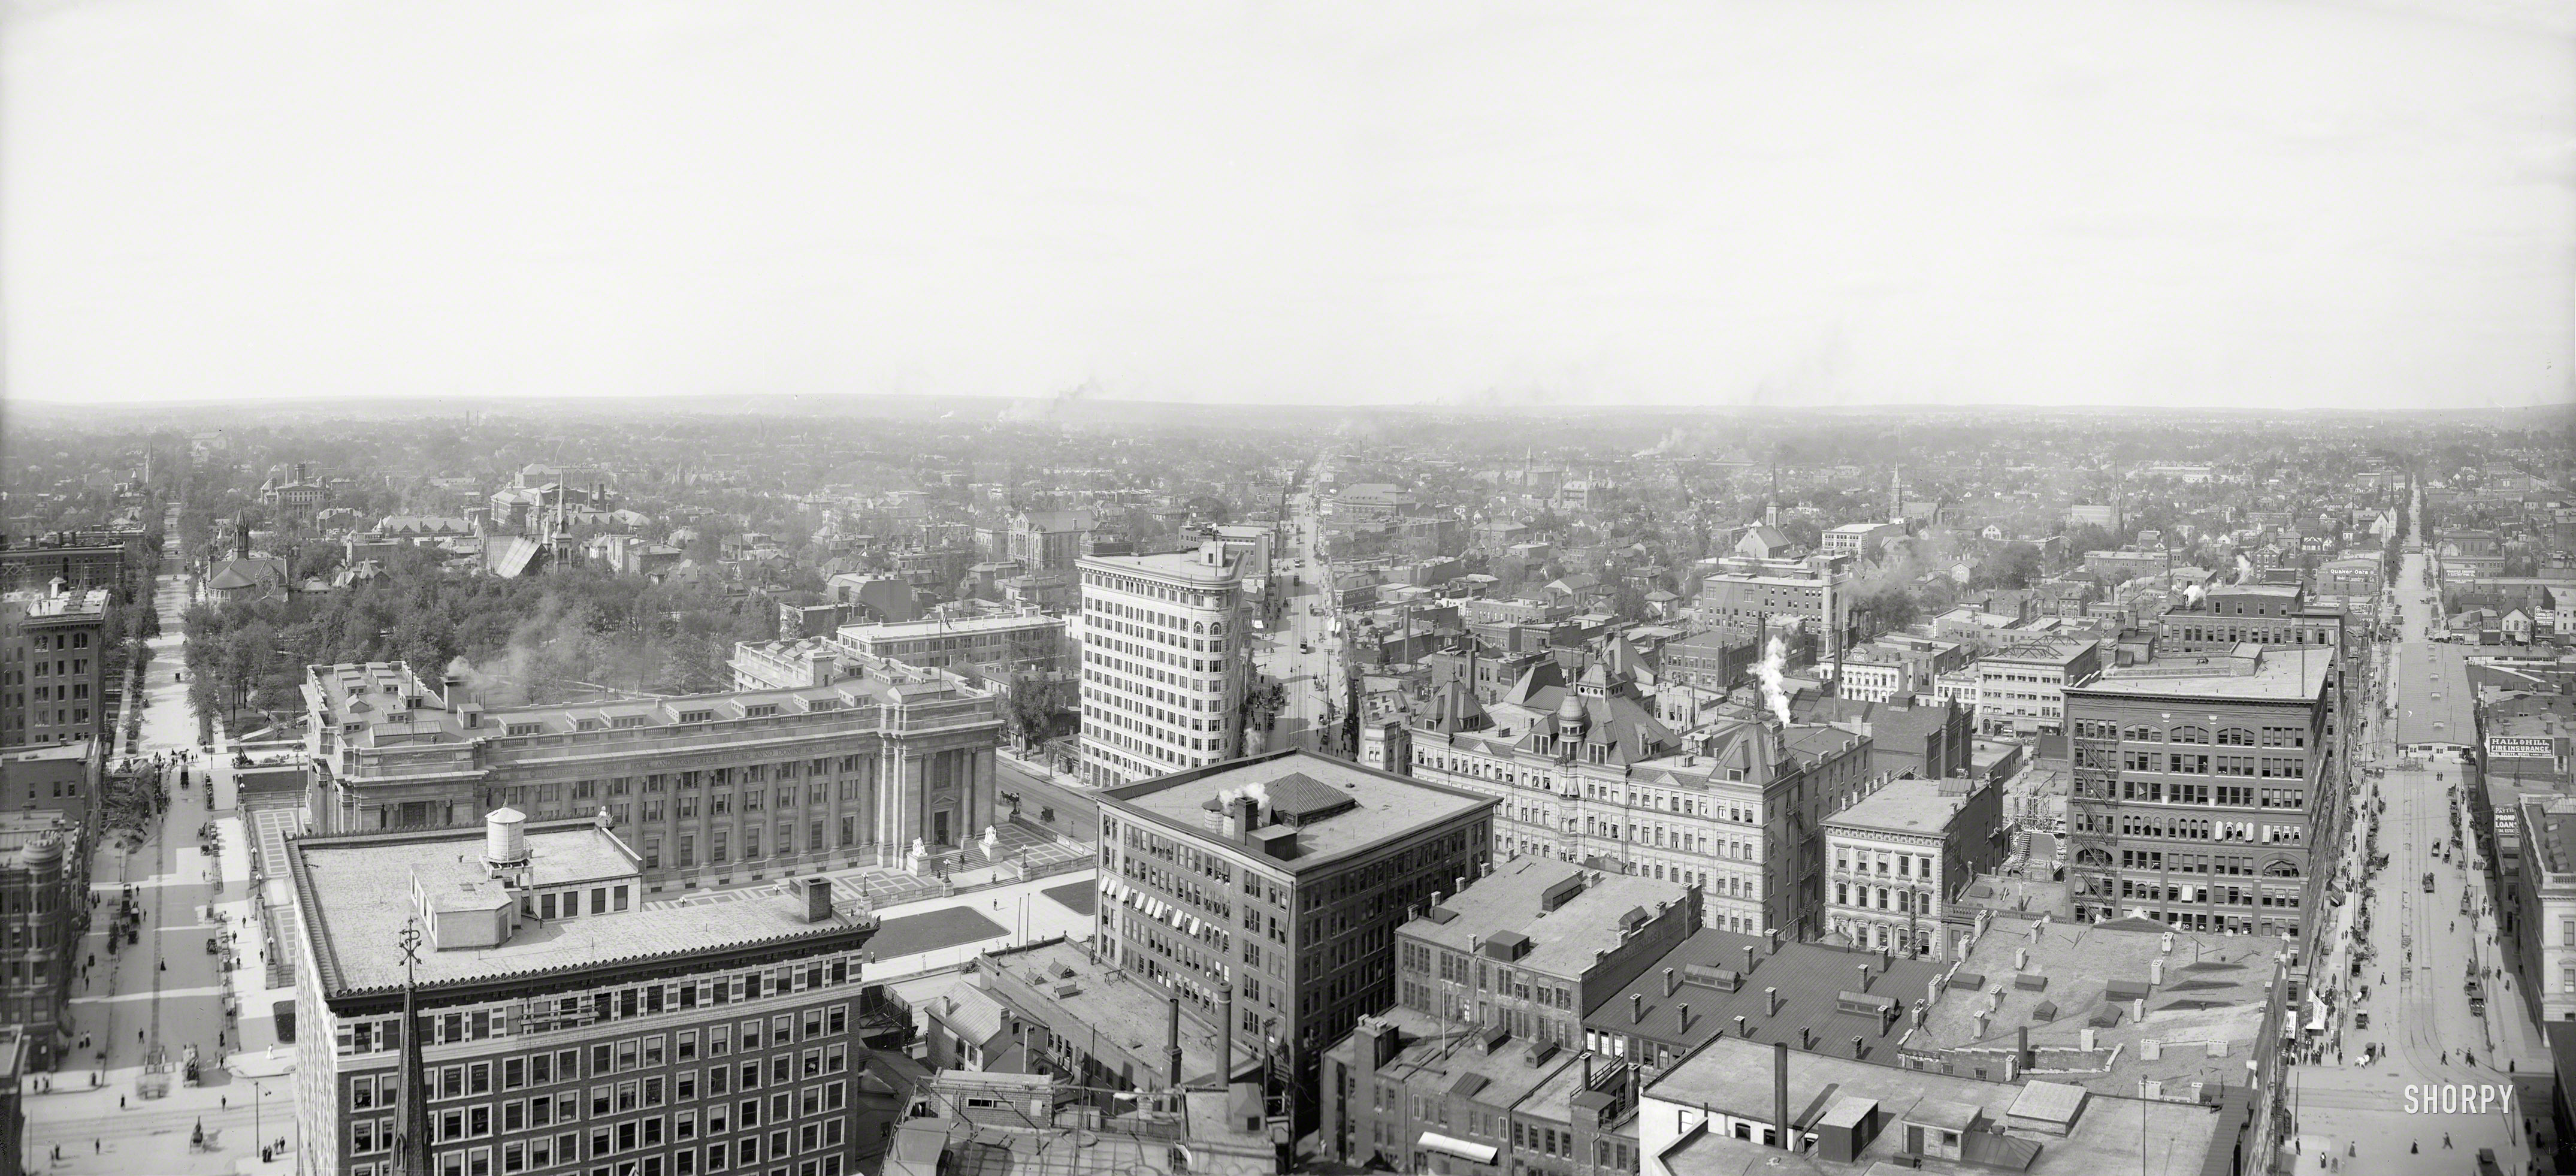 Indianapolis, Indiana, circa 1905, in a panorama made from two 8x10 inch glass plates. Who can identify the three thoroughfares? View full size.